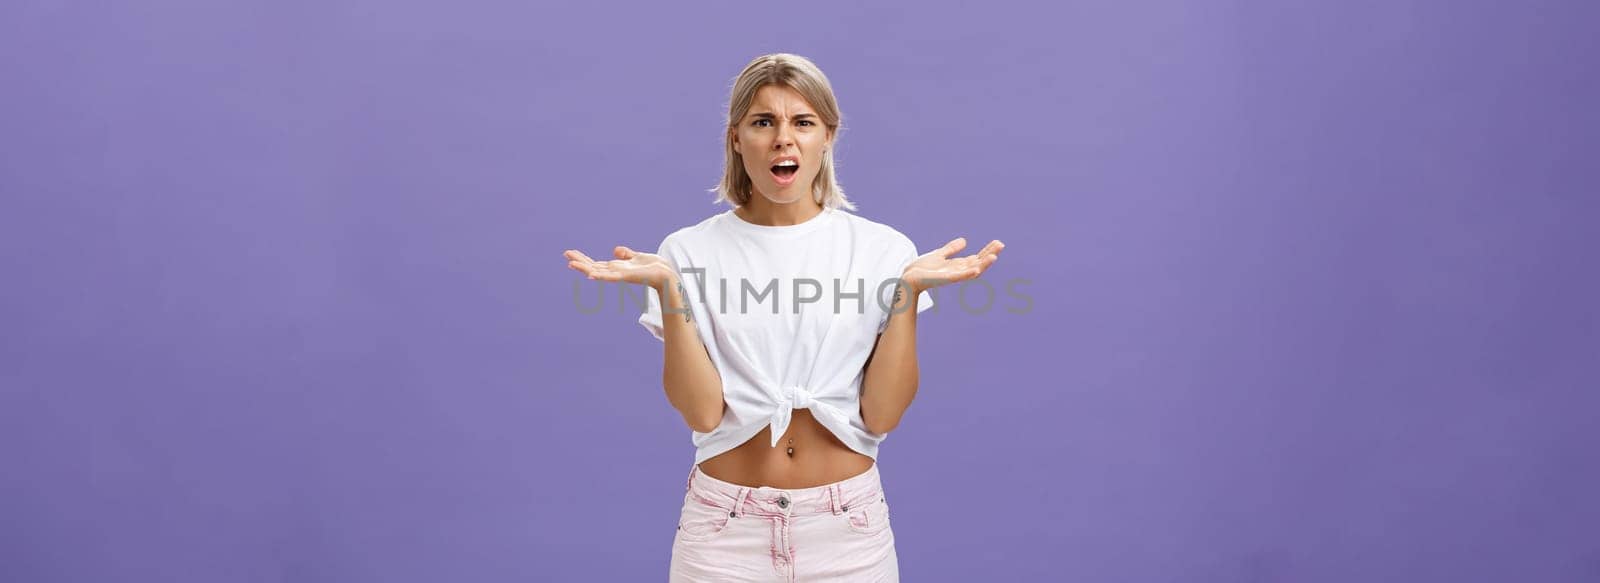 Lifestyle. Perplexed and disappointment good-looking blonde female student in white t-shirt and pink shorts frowning shrugging with spread hands near shoulders saying what the hell over purple wall.